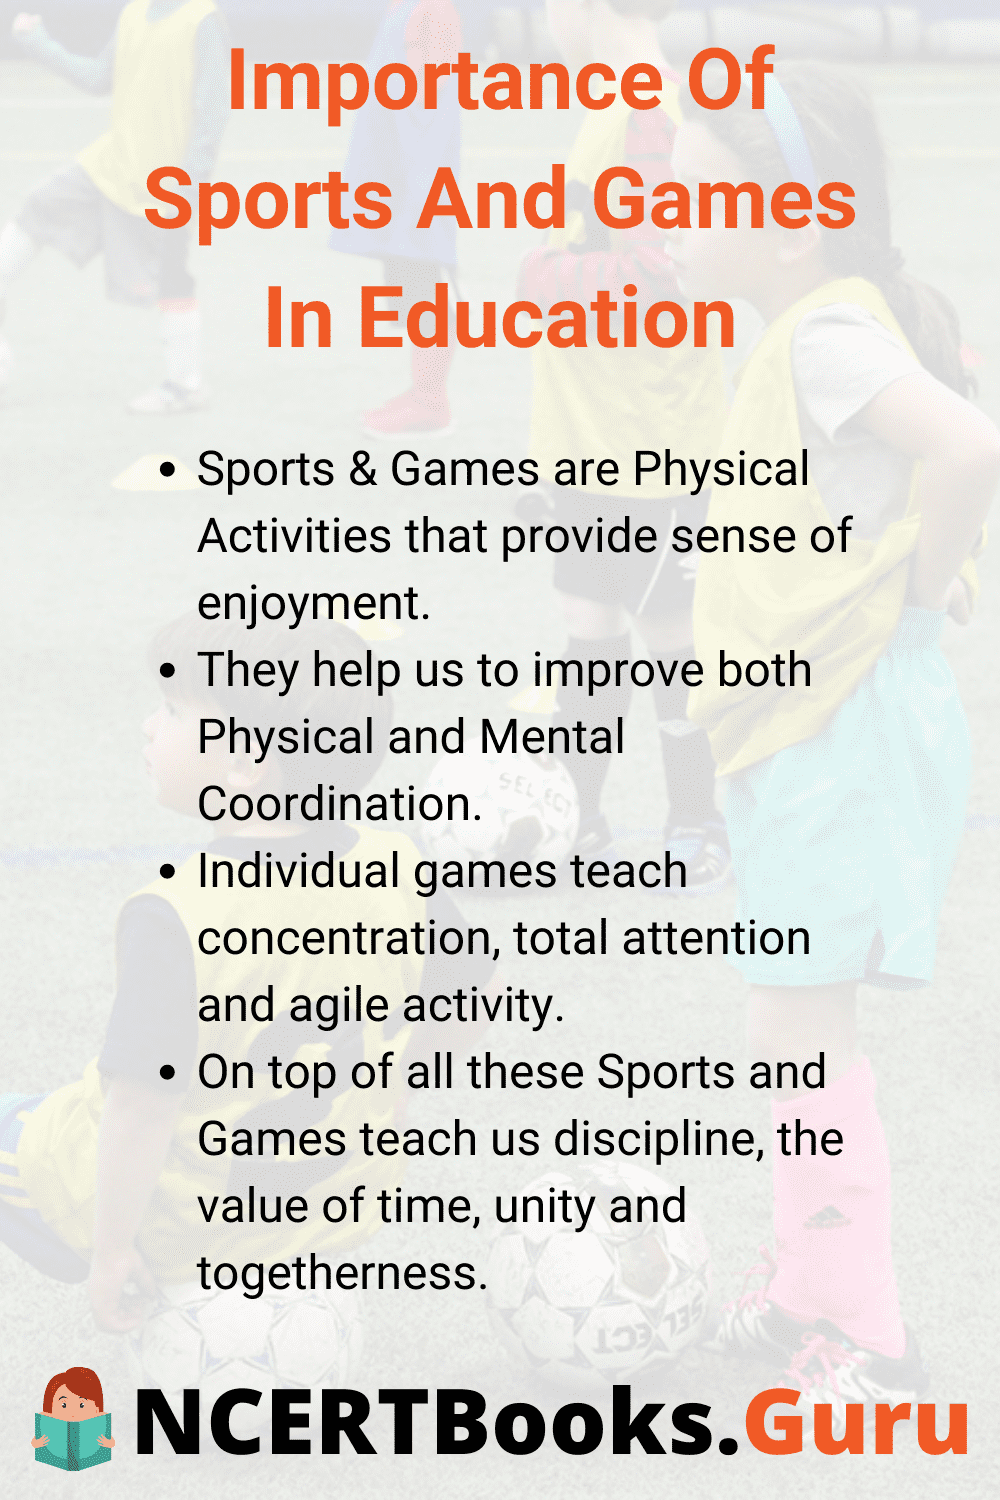 write an essay importance of games and sports